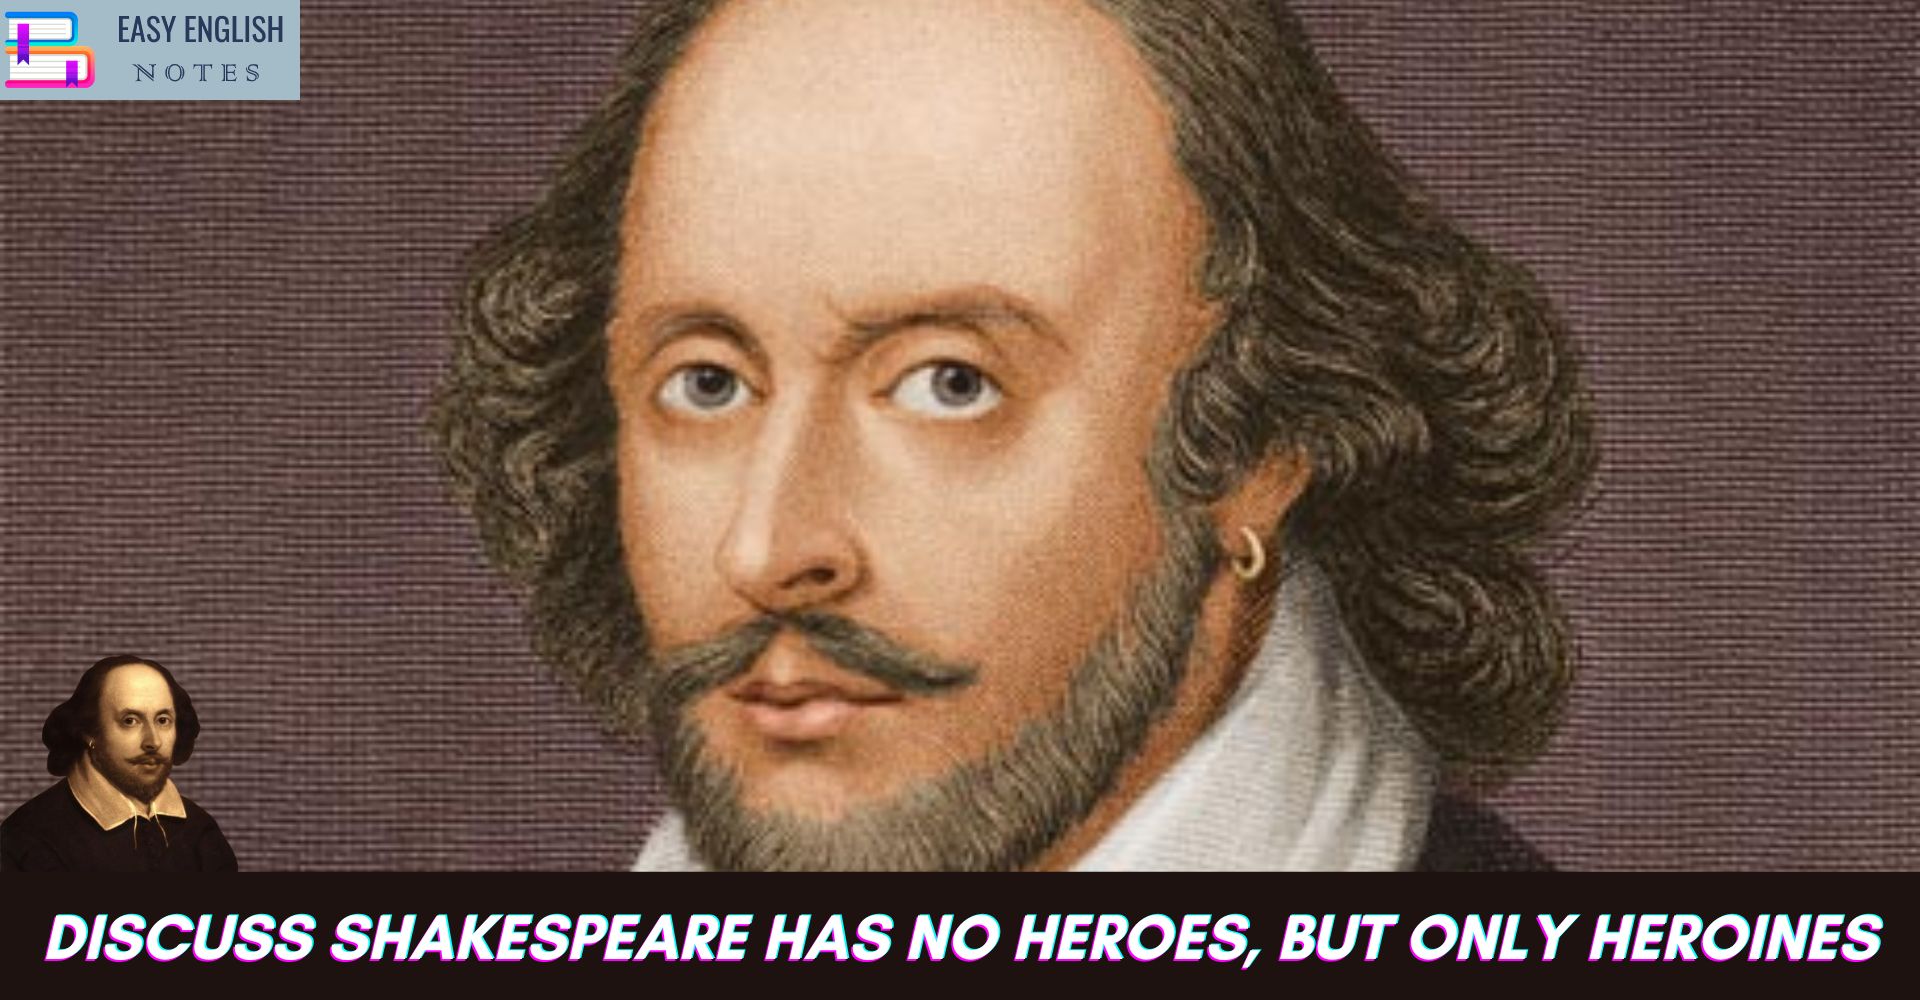 Discuss Shakespeare Has No Heroes, But Only Heroines